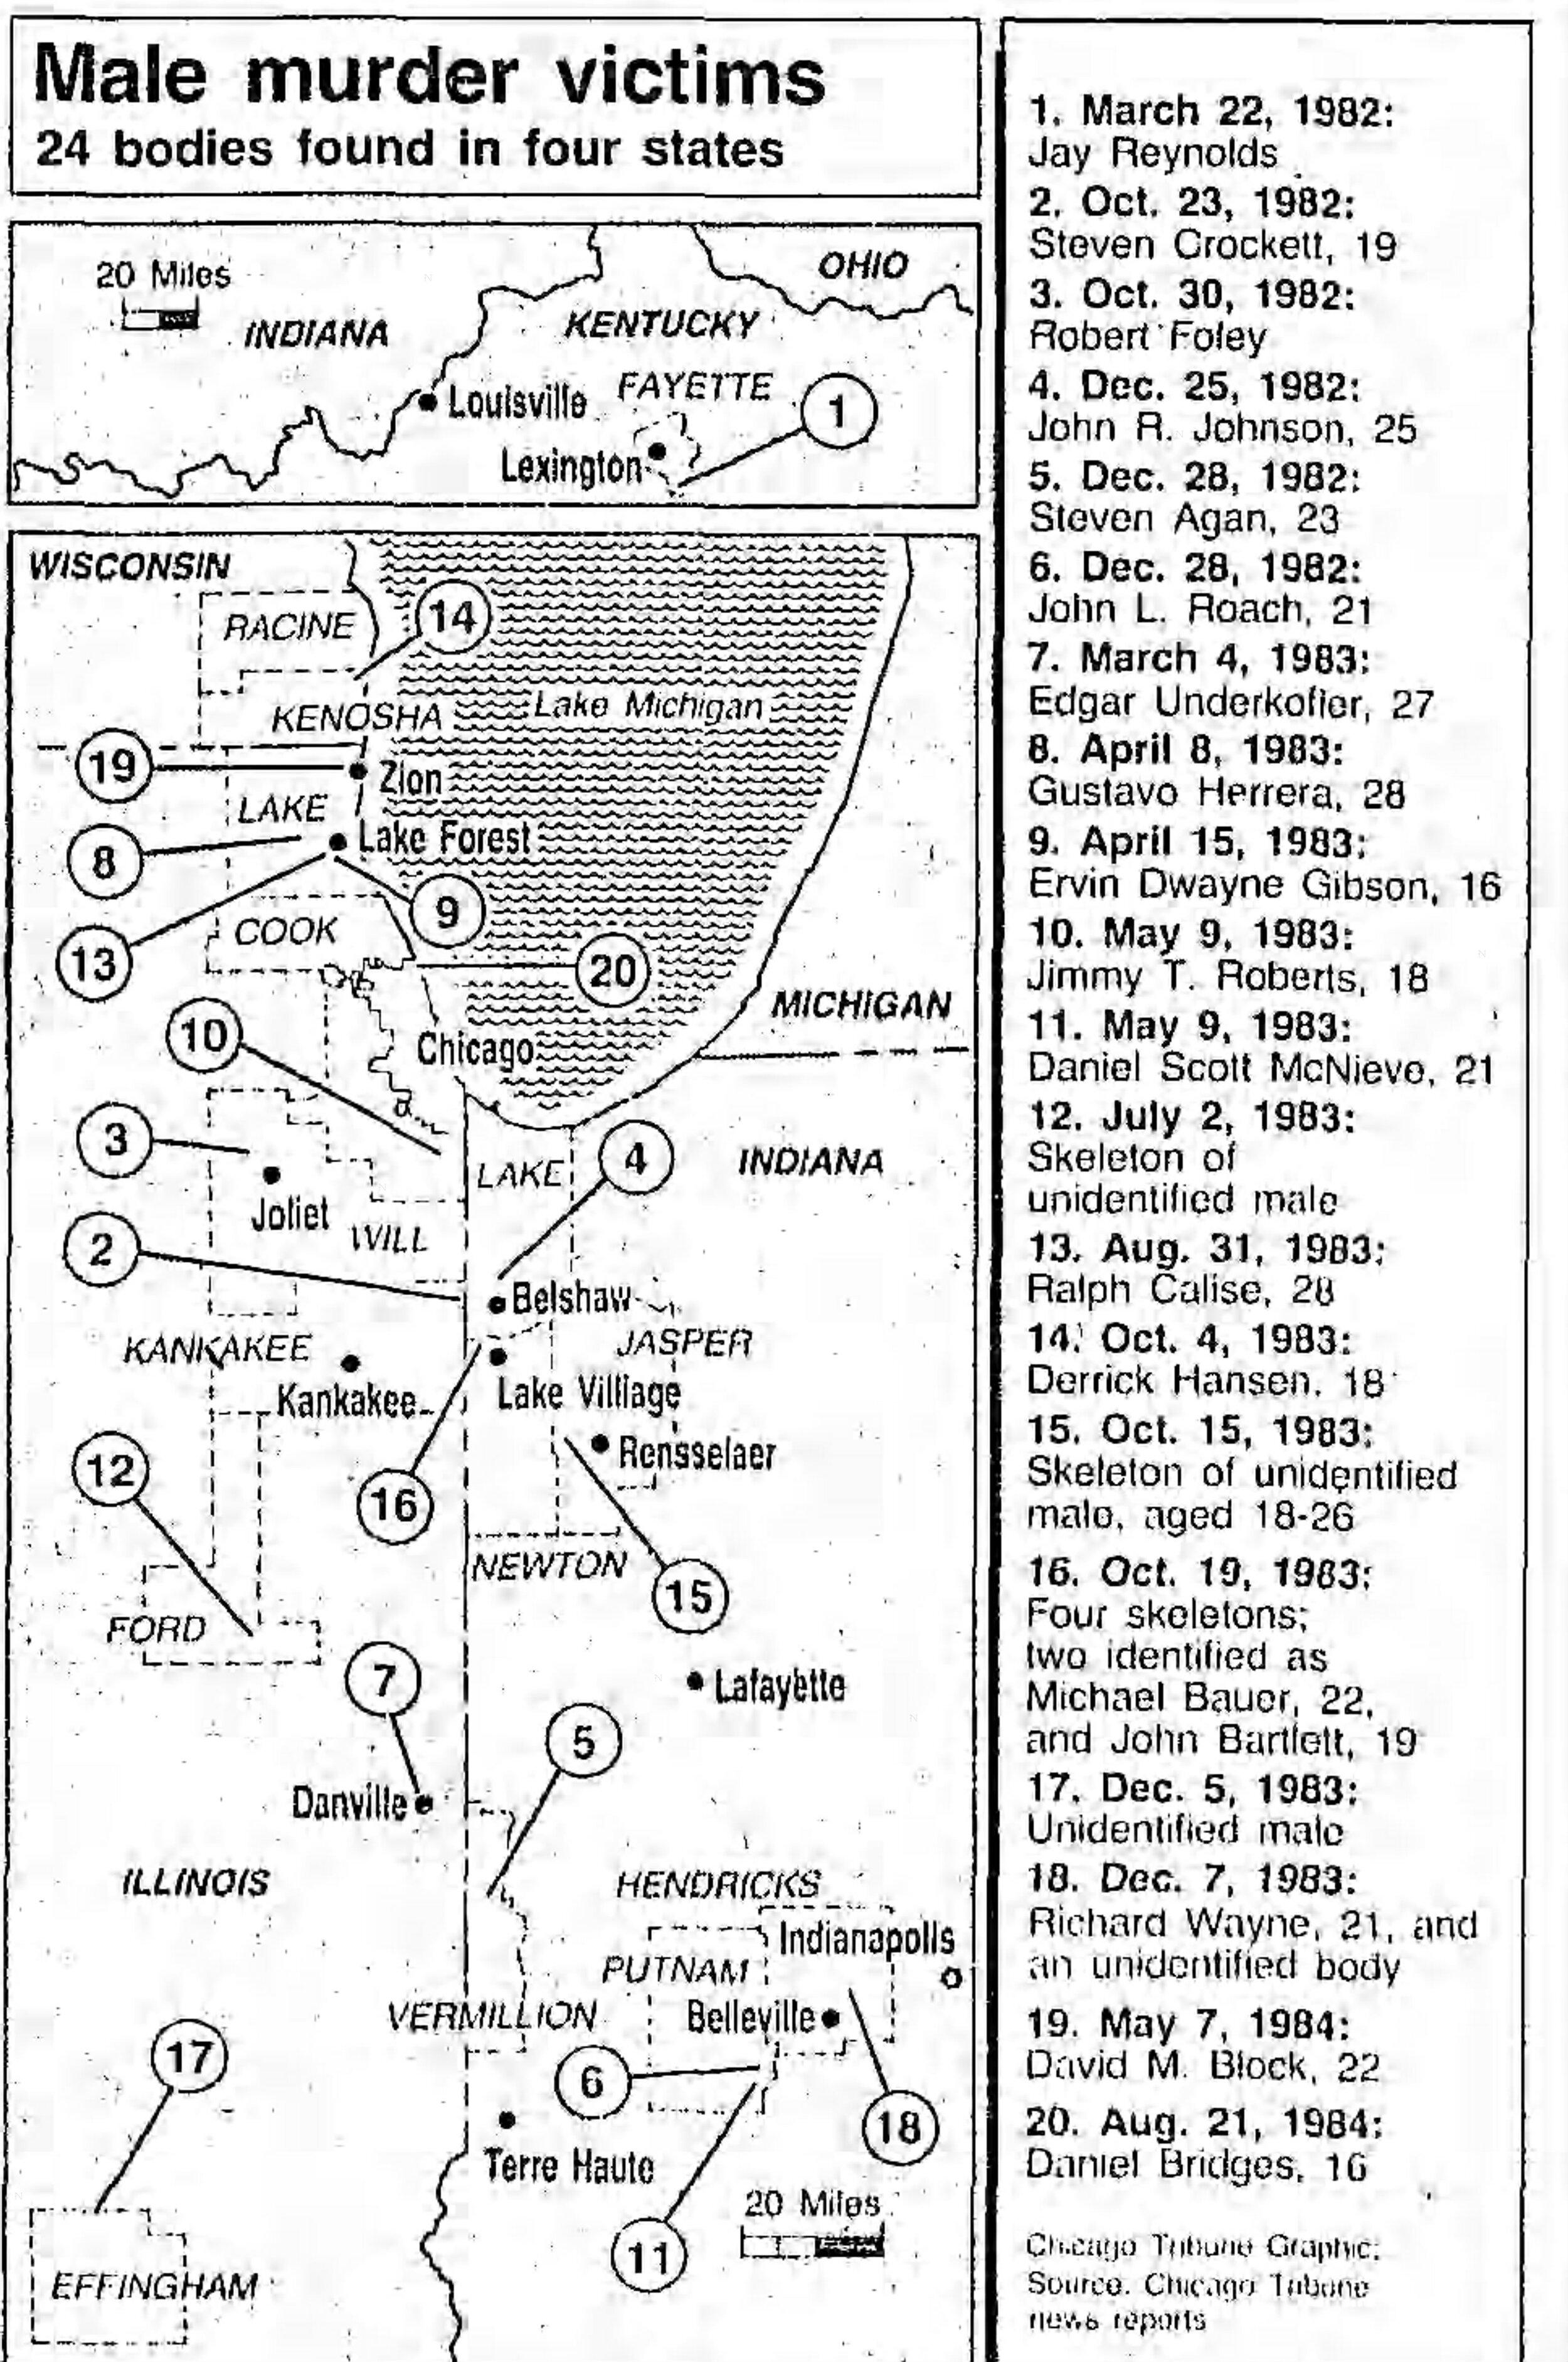  This map lists the dates and locations of when and where the bodies of Eyler’s victims were found.  Source: The Chicago Tribune, 24 Aug 1984  